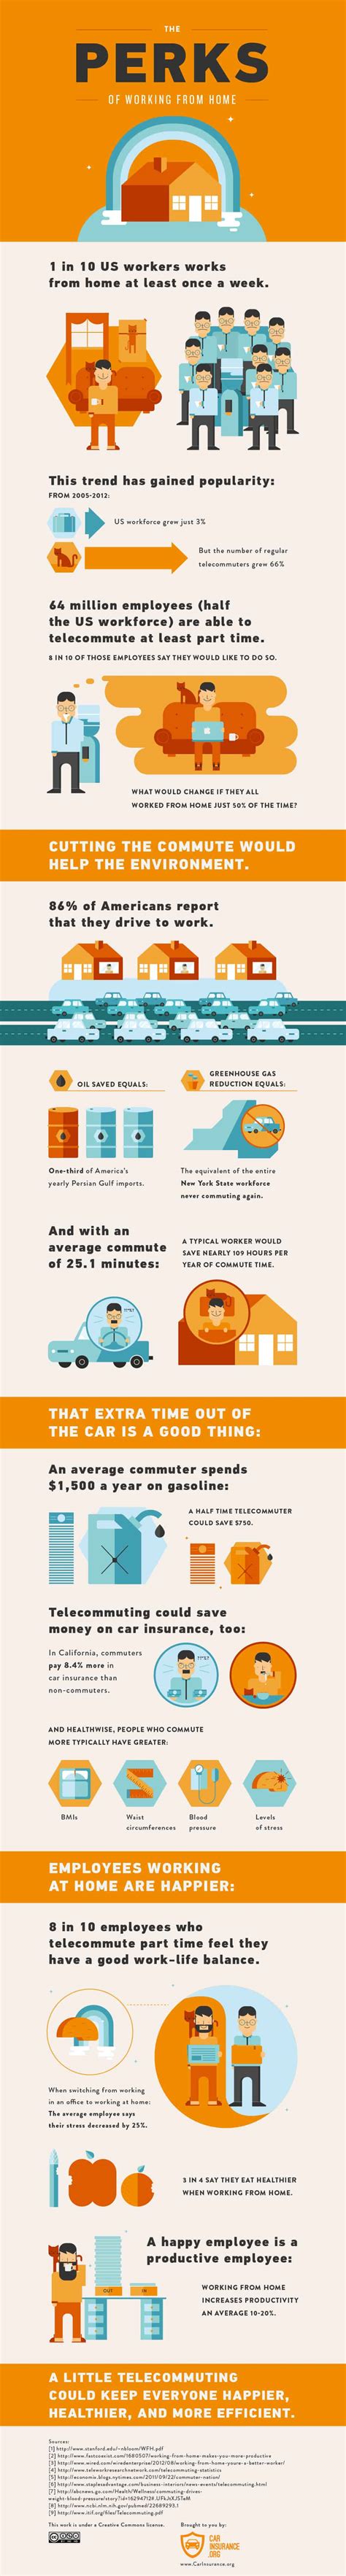 The Perks Of Working At Home Daily Infographic